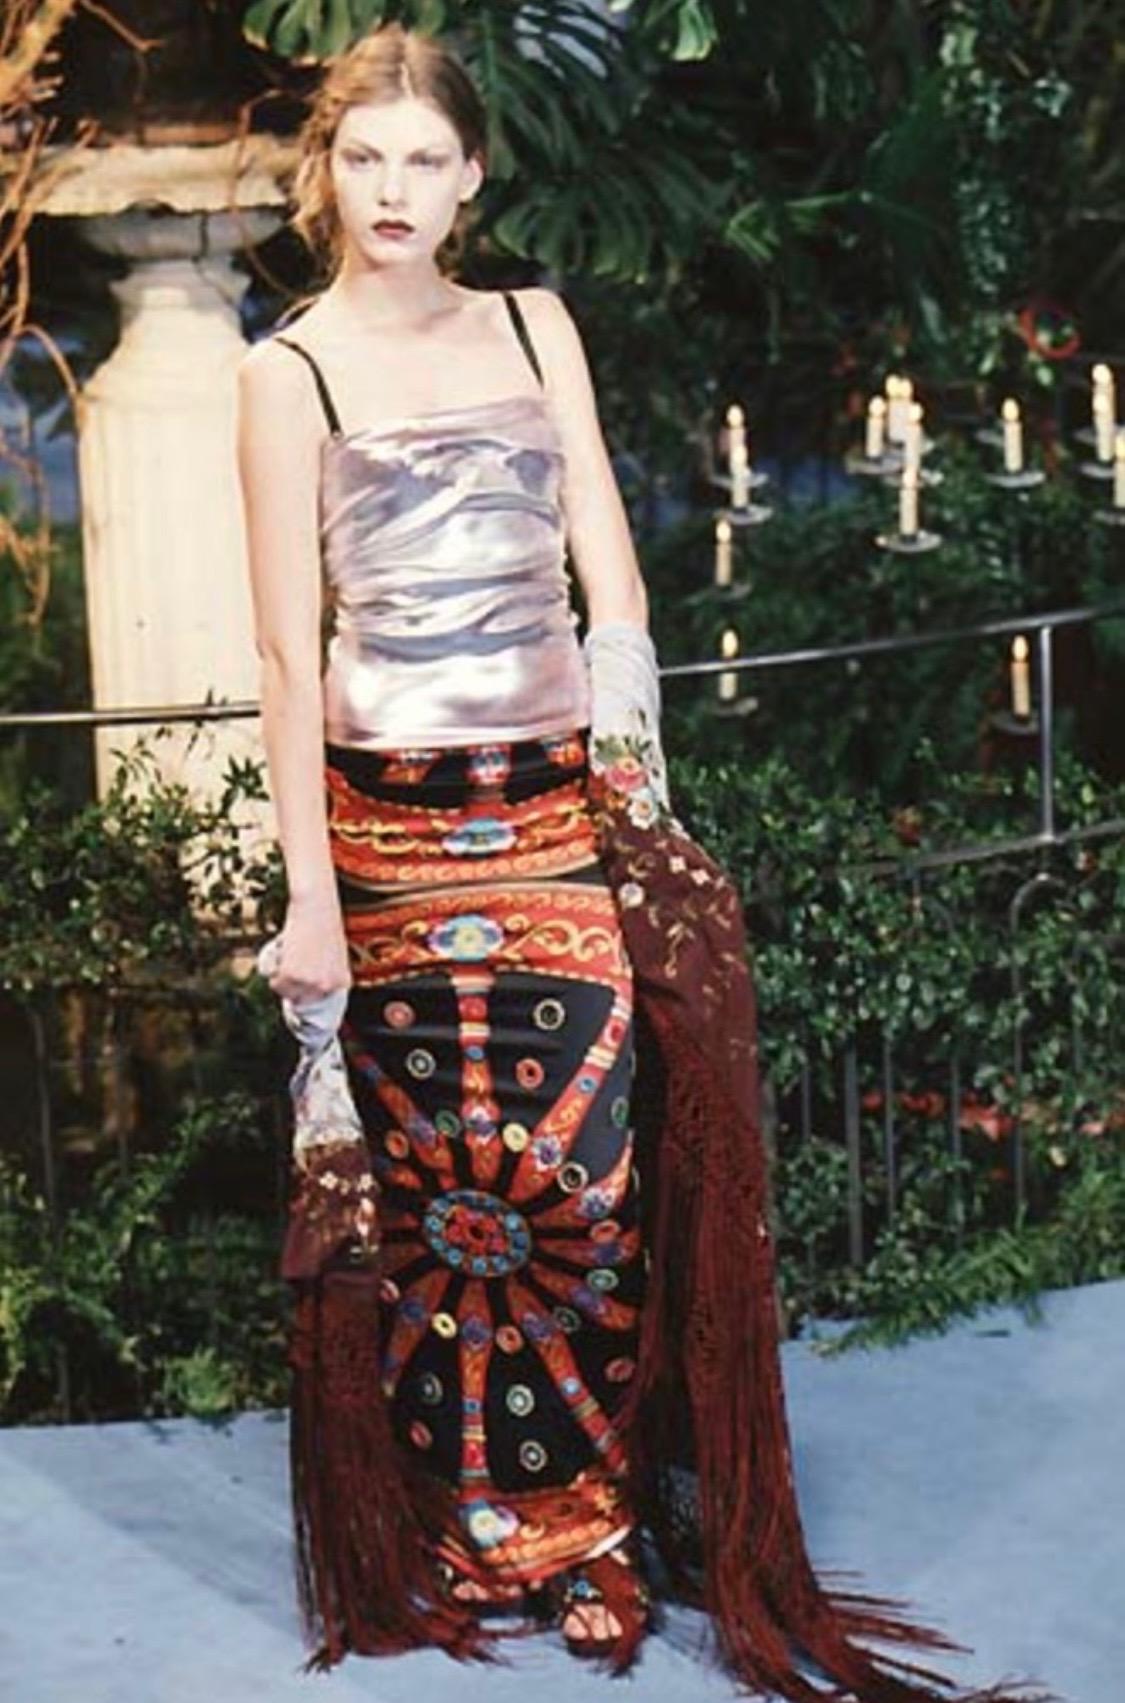 Presenting a printed silk tapered maxi skirt designed by Dolce and Gabbana for their Fall/Winter 1998 collection. Debuting in the season's runway presentation in black and navy, this piece features small circular mirror appliqués attached with